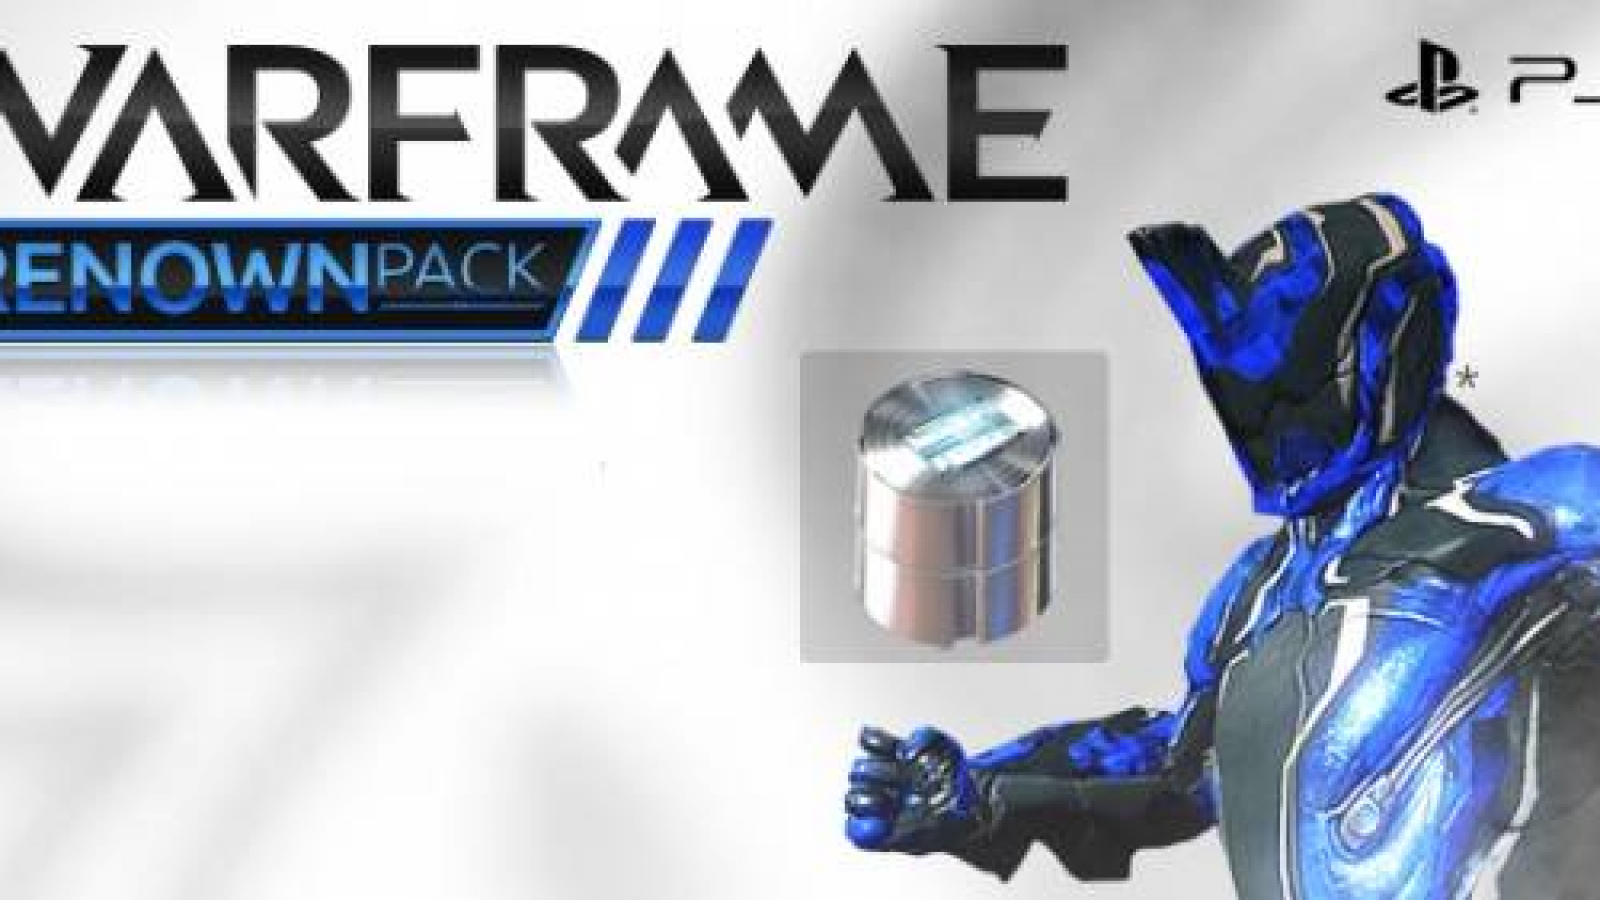 LAST CHANCE FOR RENOWN PACK III!